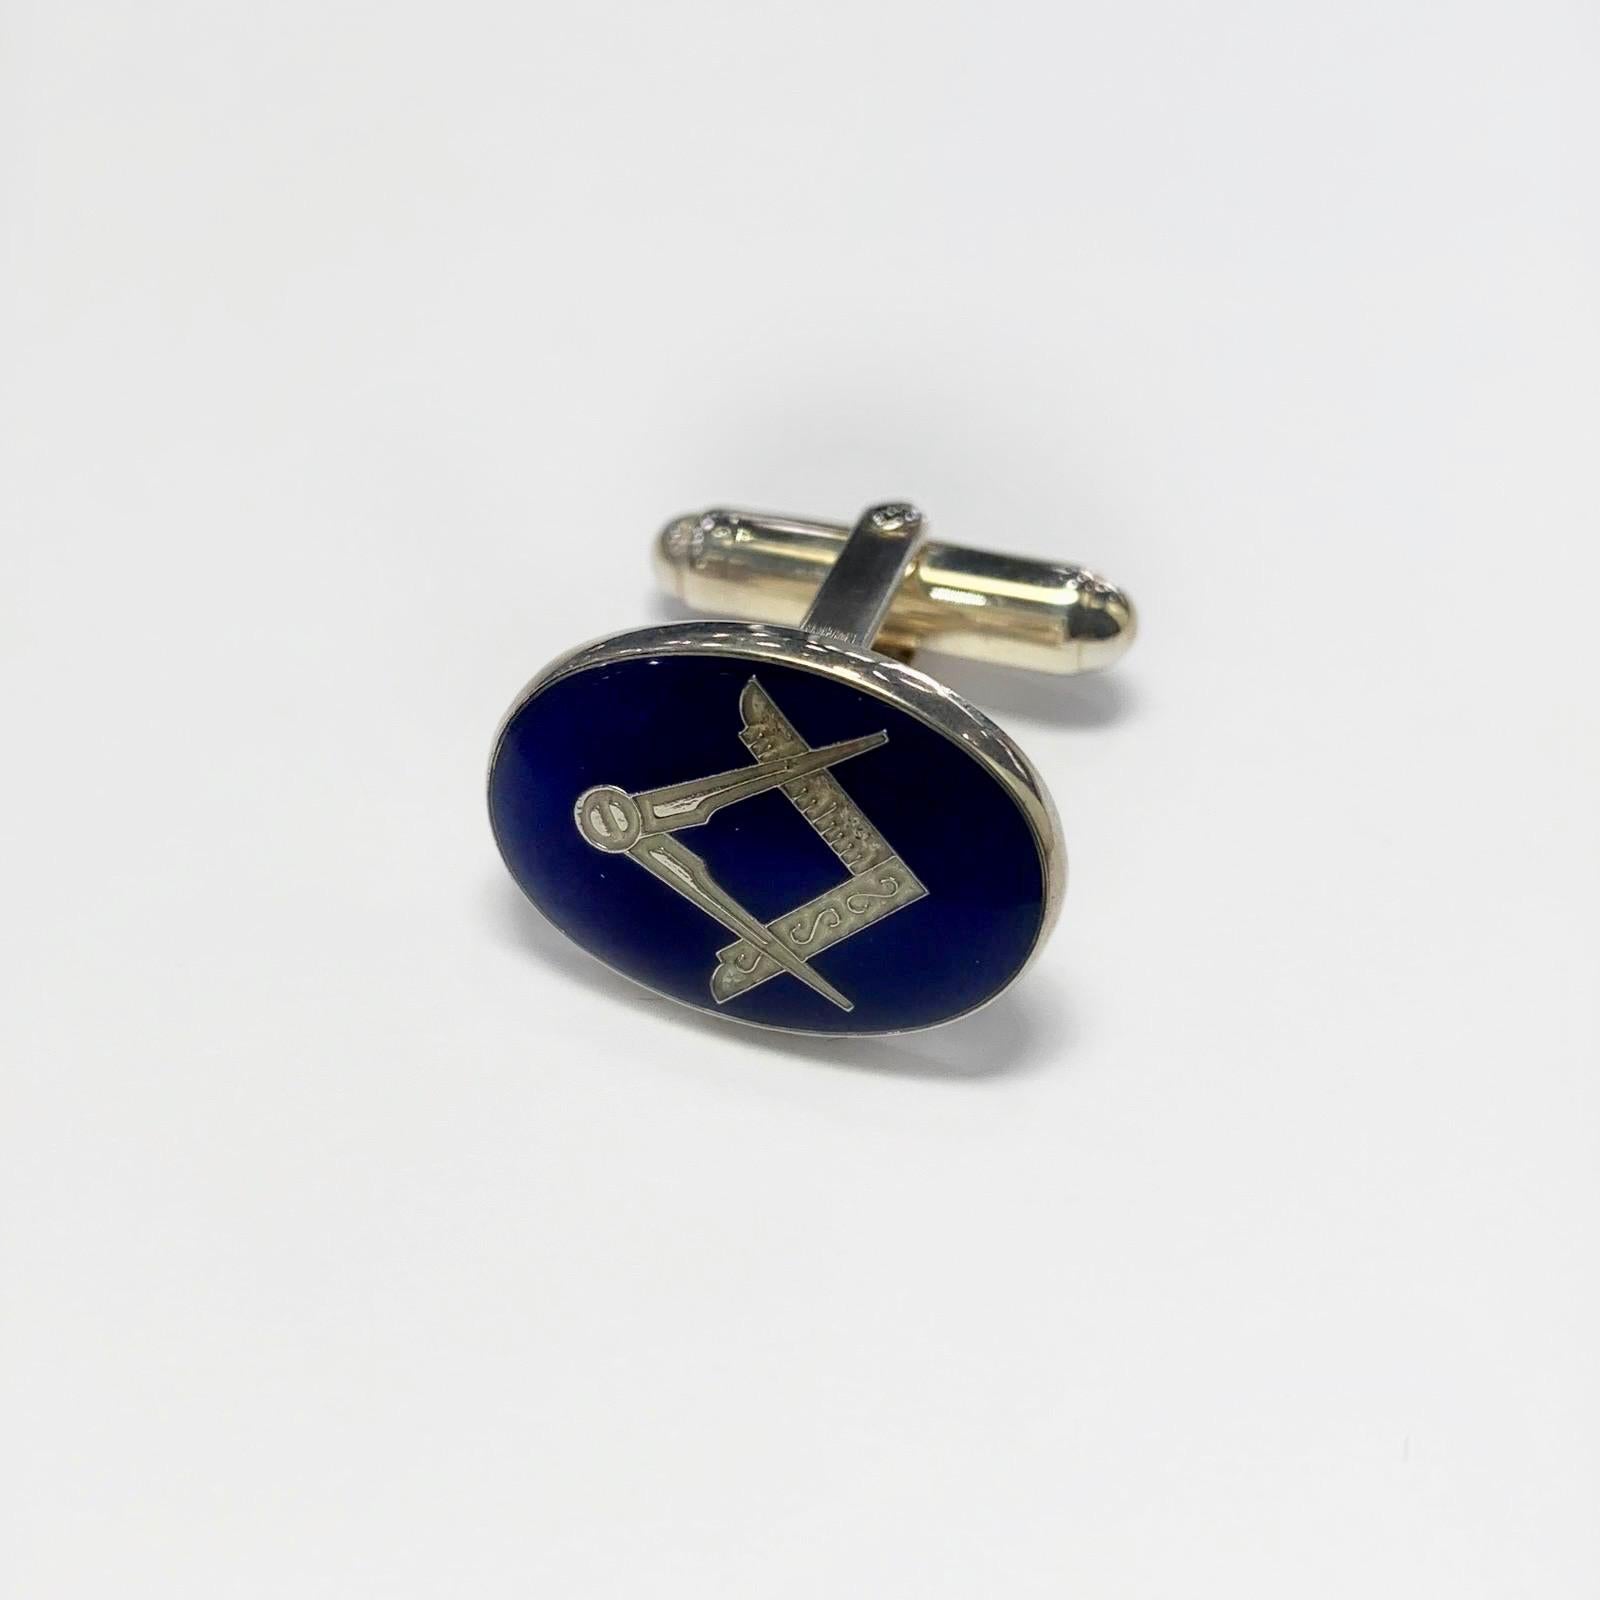 Great Quality Silver Masonic Hinged Cufflinks. English made with full English hallmark. 

Face dimensions : 19mm x 13mm